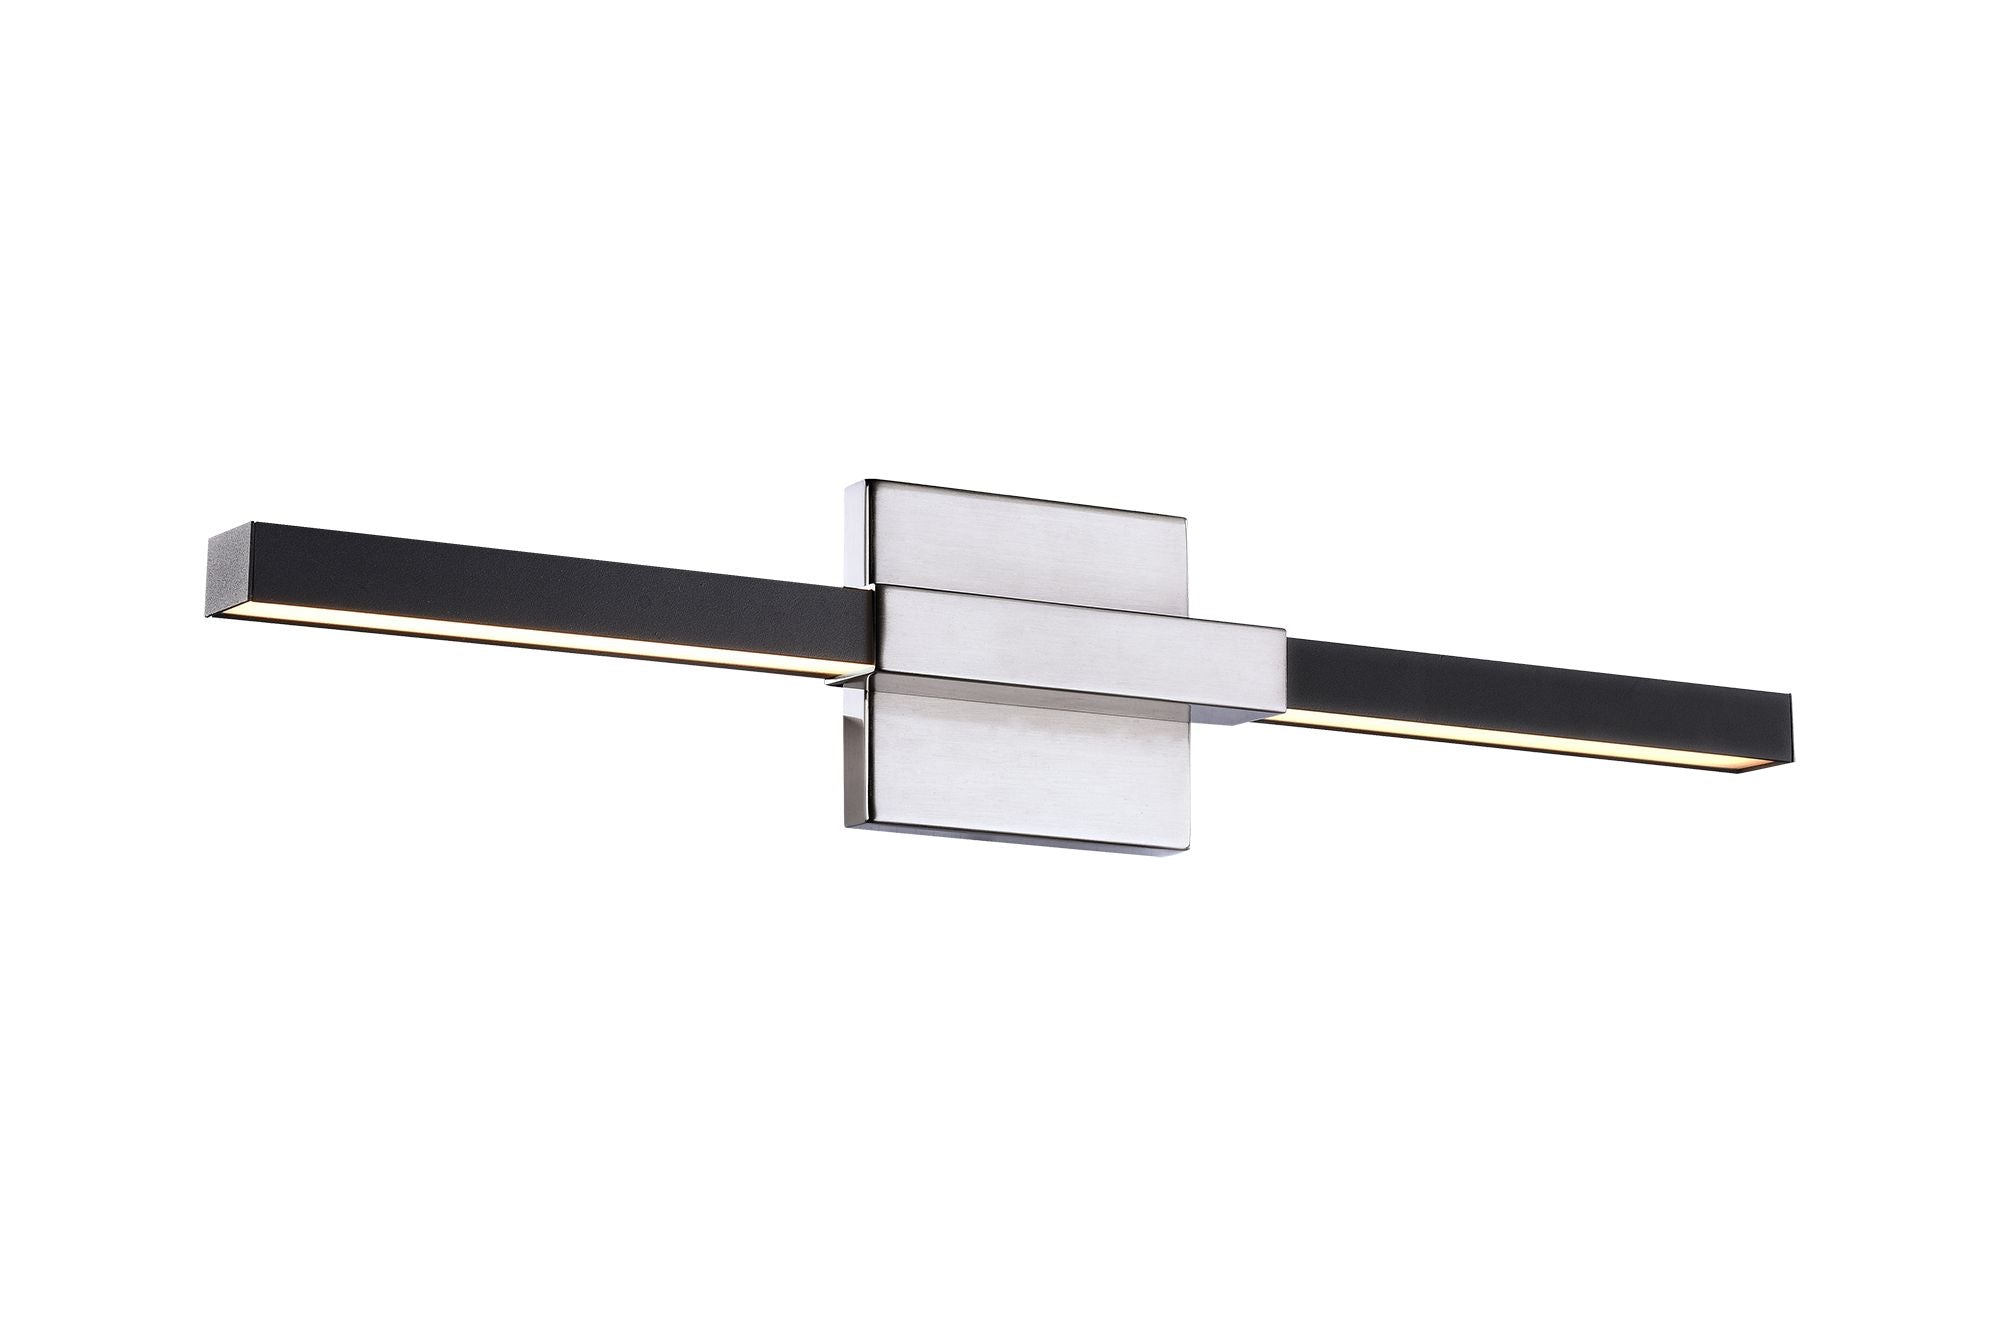 LINEARE Wall sconce Black, Chrome INTEGRATED LED - W64721MBCH | MATTEO